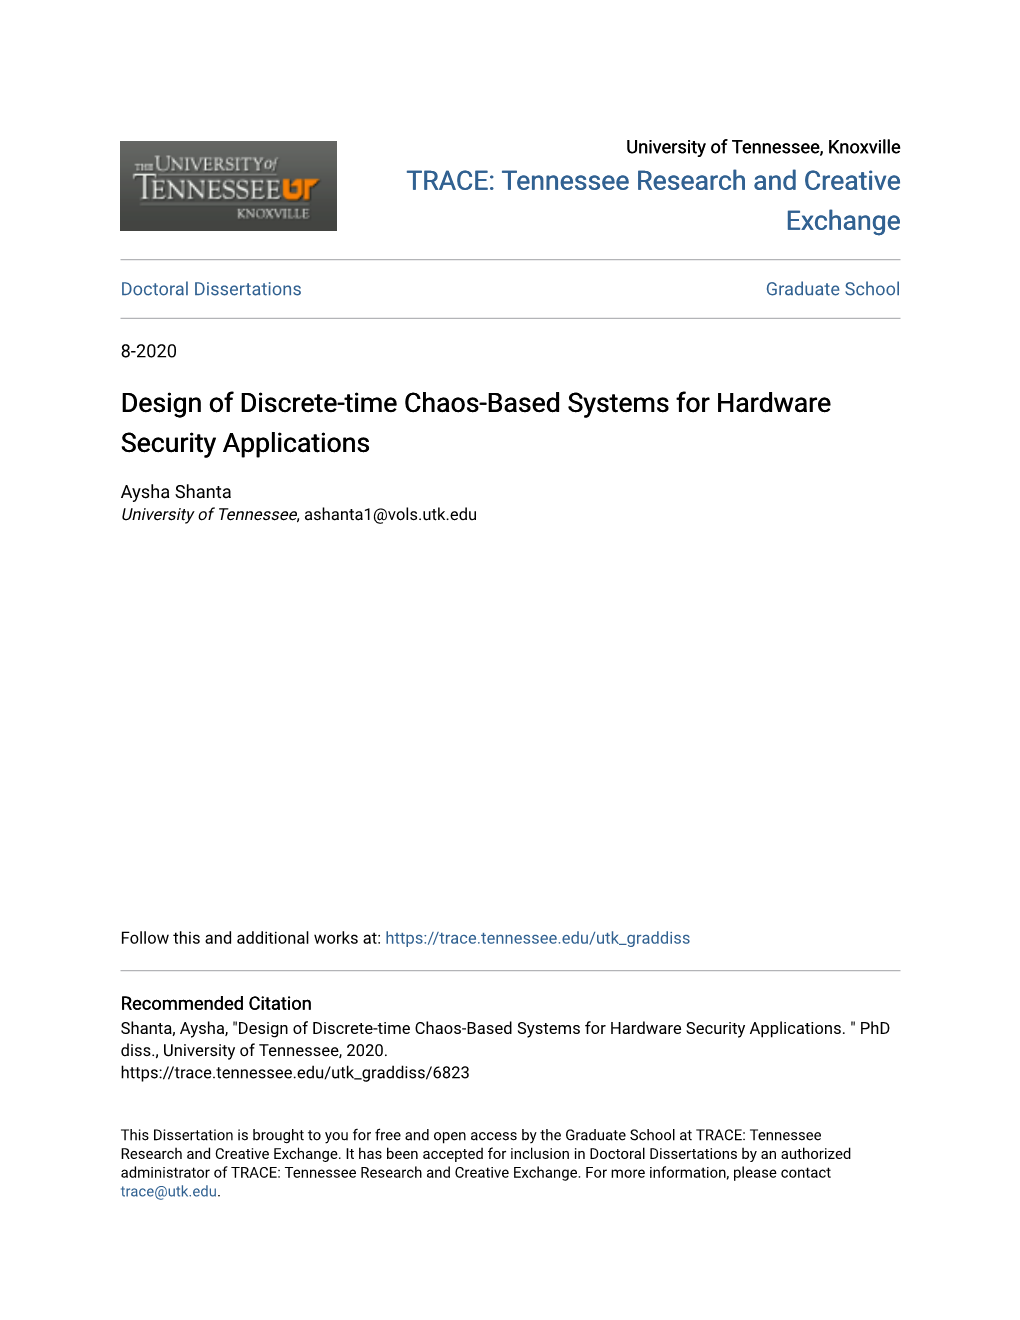 Design of Discrete-Time Chaos-Based Systems for Hardware Security Applications